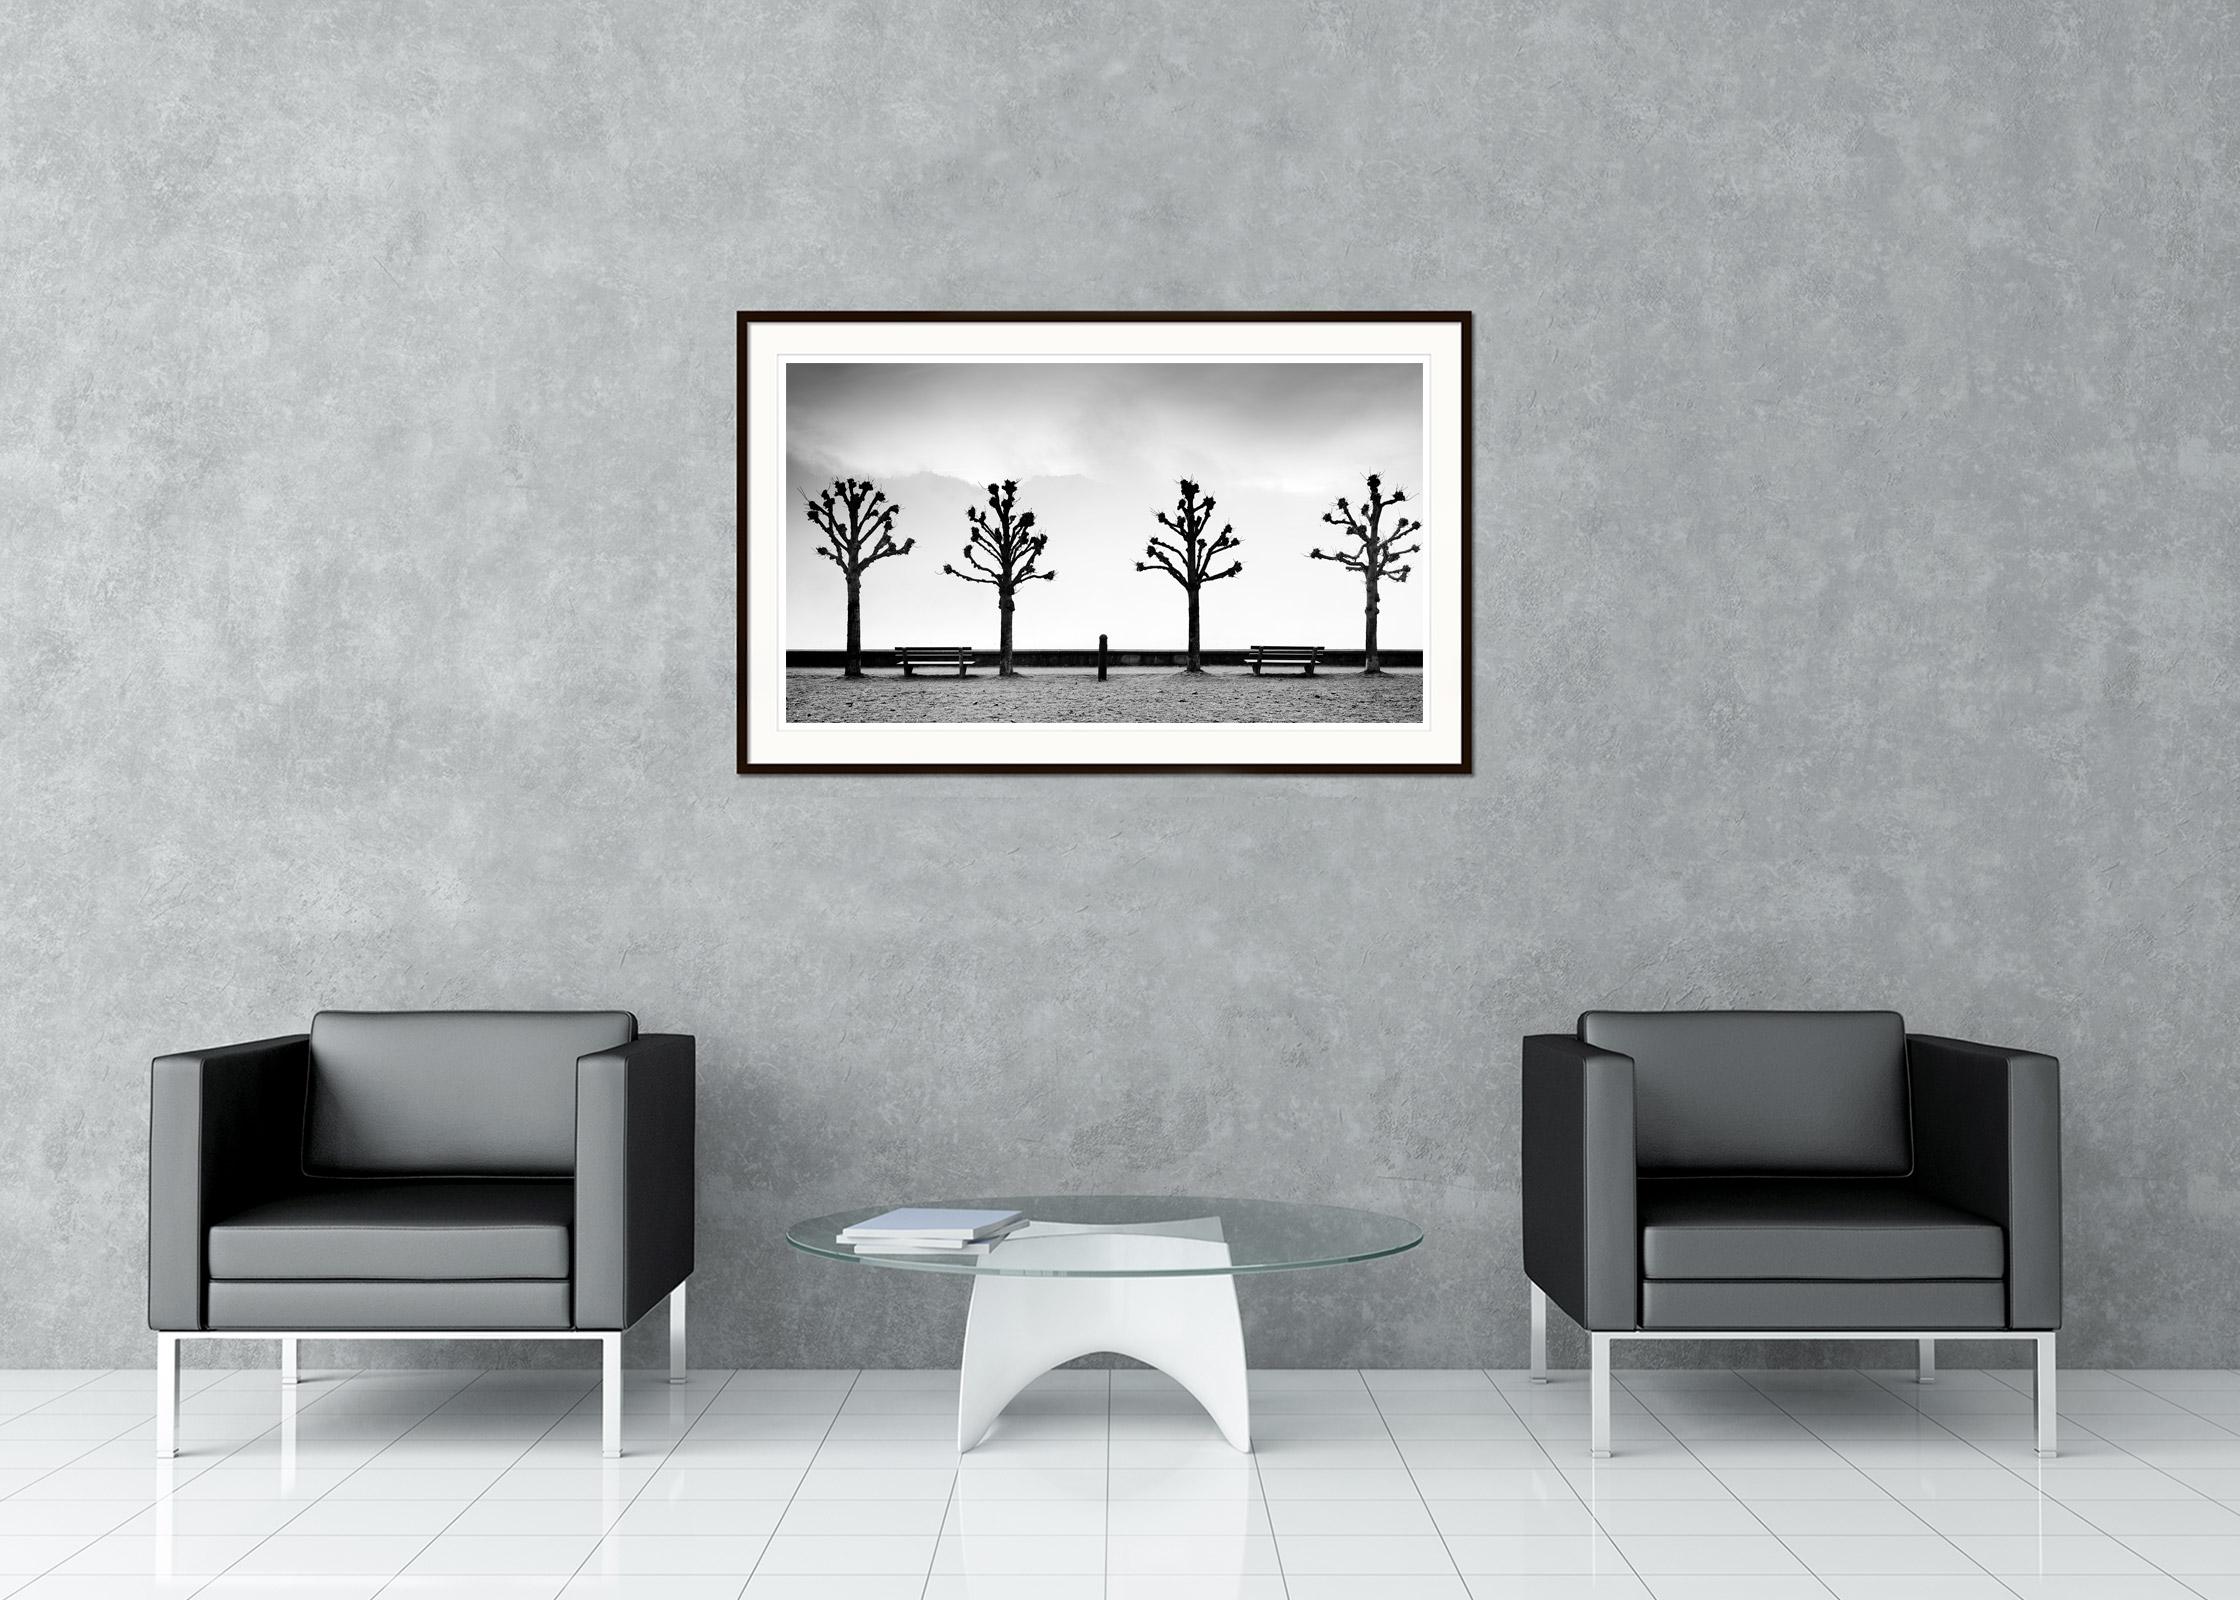 Black and white fine art landscape photography. Chestnut trees on the promenade in historic Gmunden, Austria. Archival pigment ink print as part of a limited edition of 8. All Gerald Berghammer prints are made to order in limited editions on